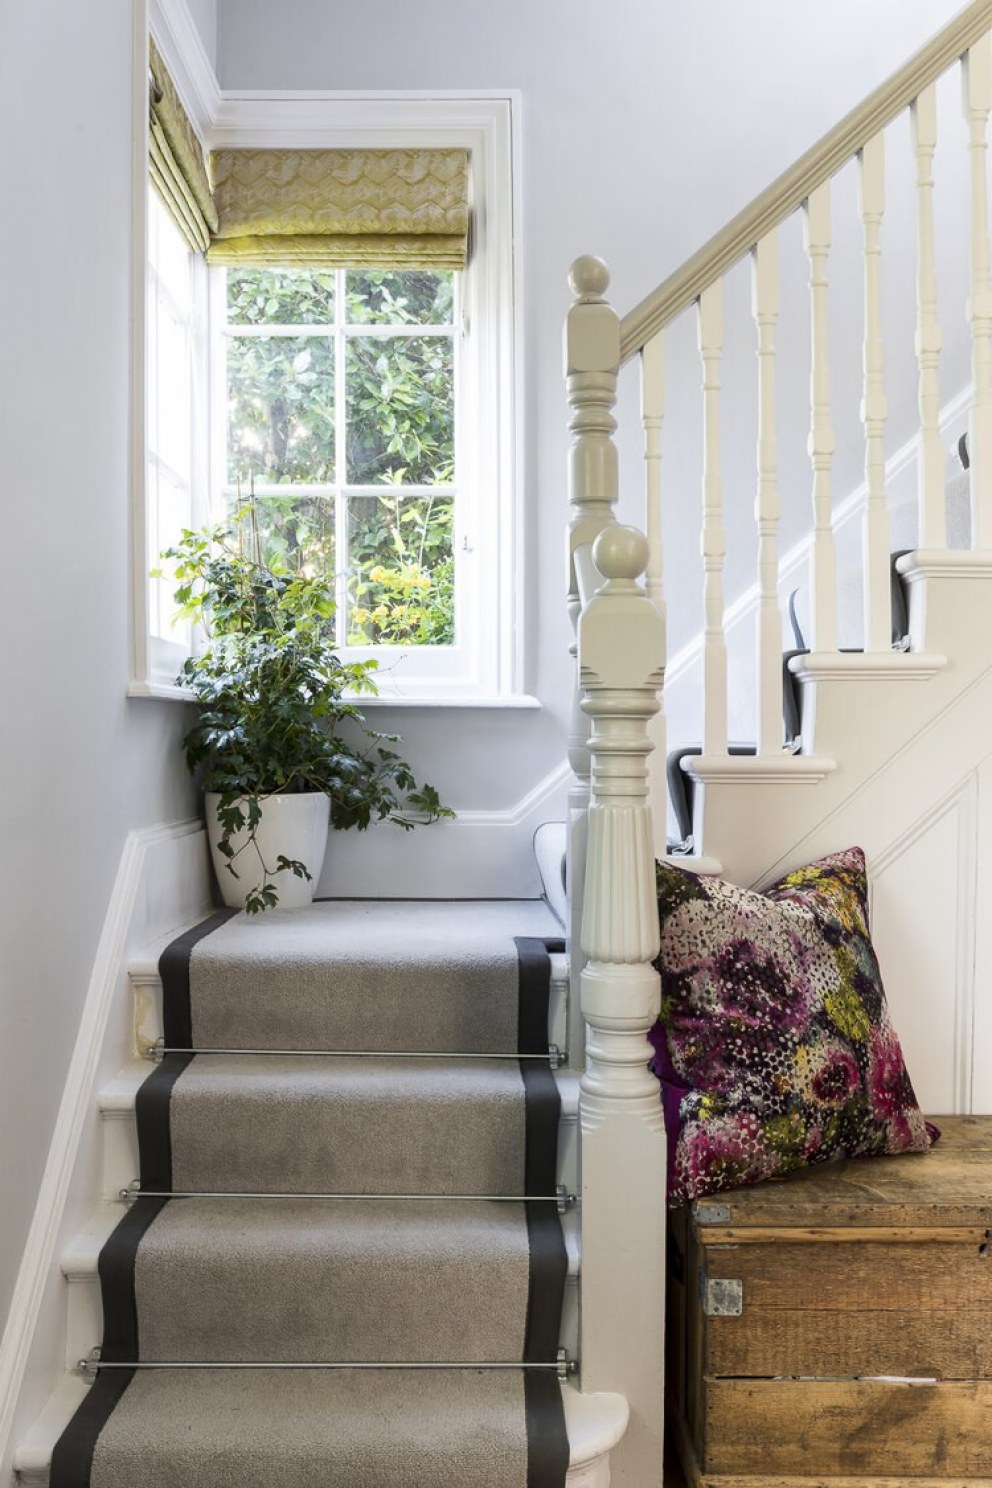 Edwardian House on The Green | Entrance Hall 1 | Interior Designers